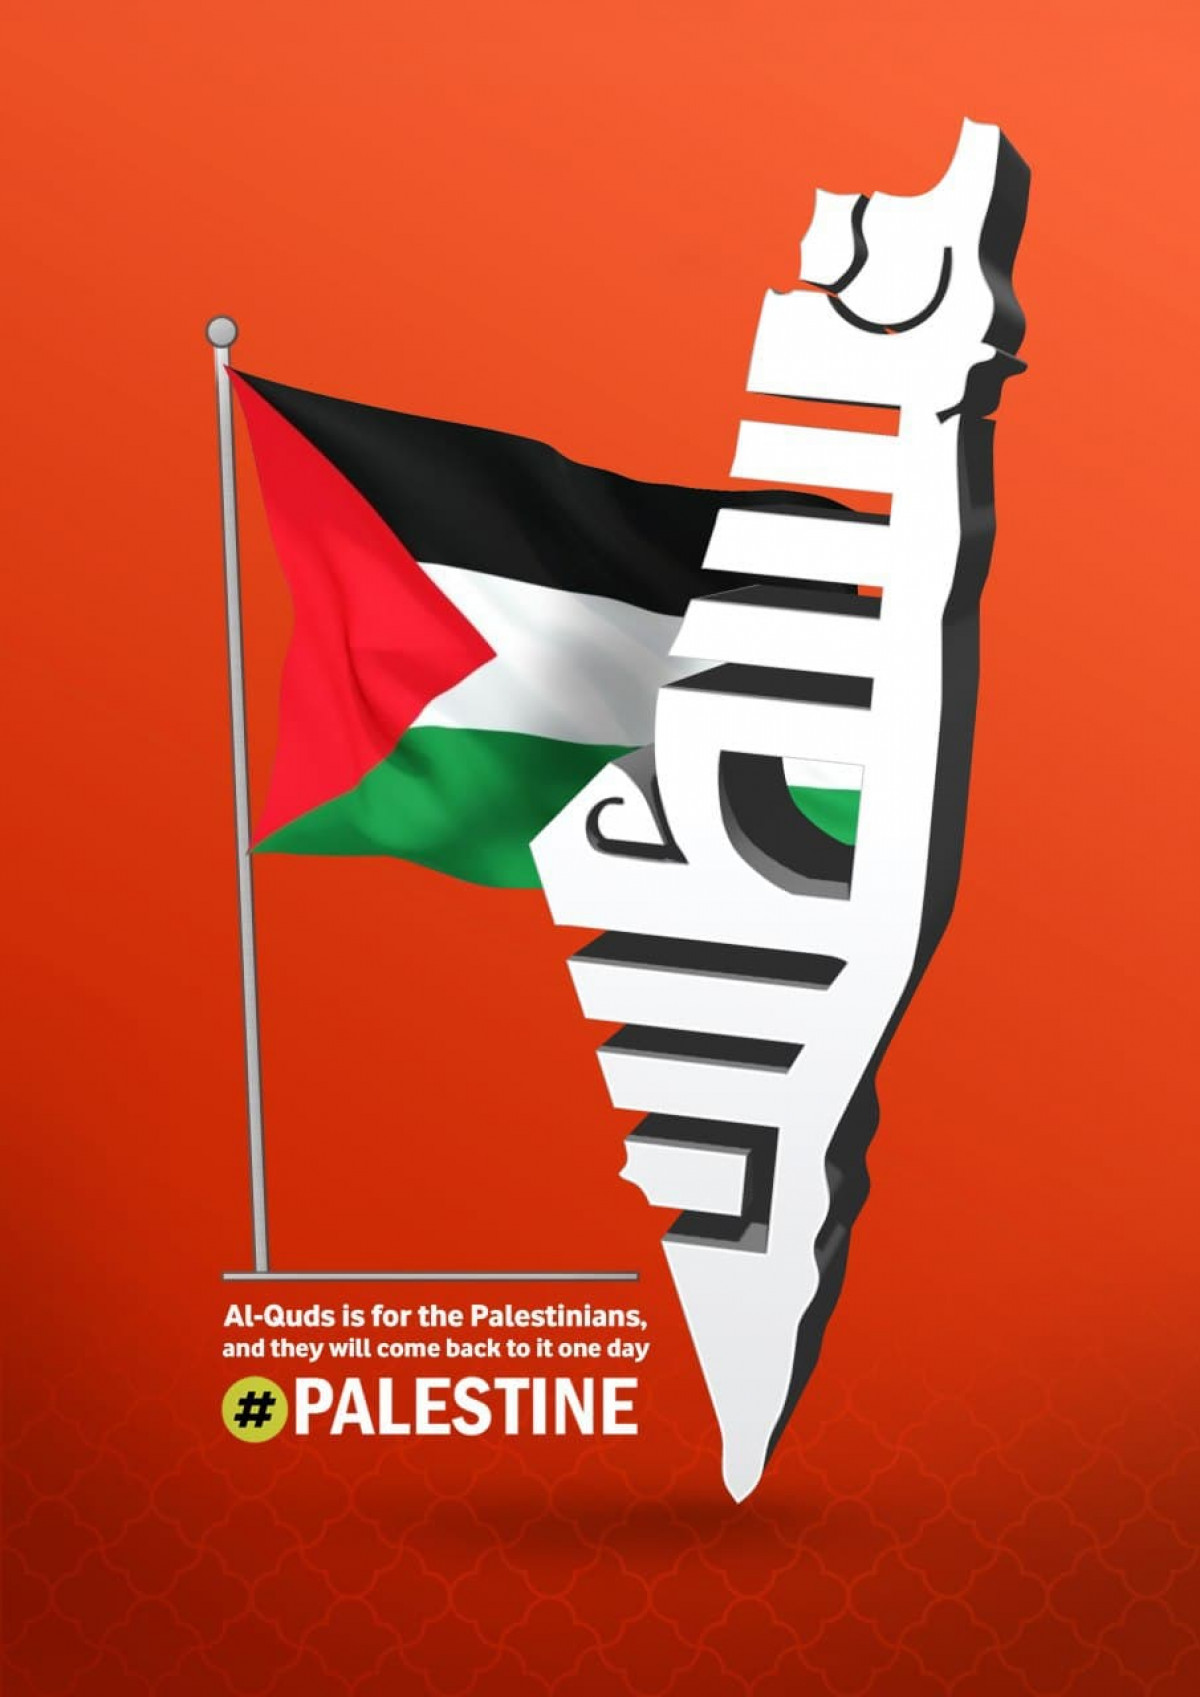 Collection of posters: Al-Quds is for the Palestinians, and they will come back to it one day